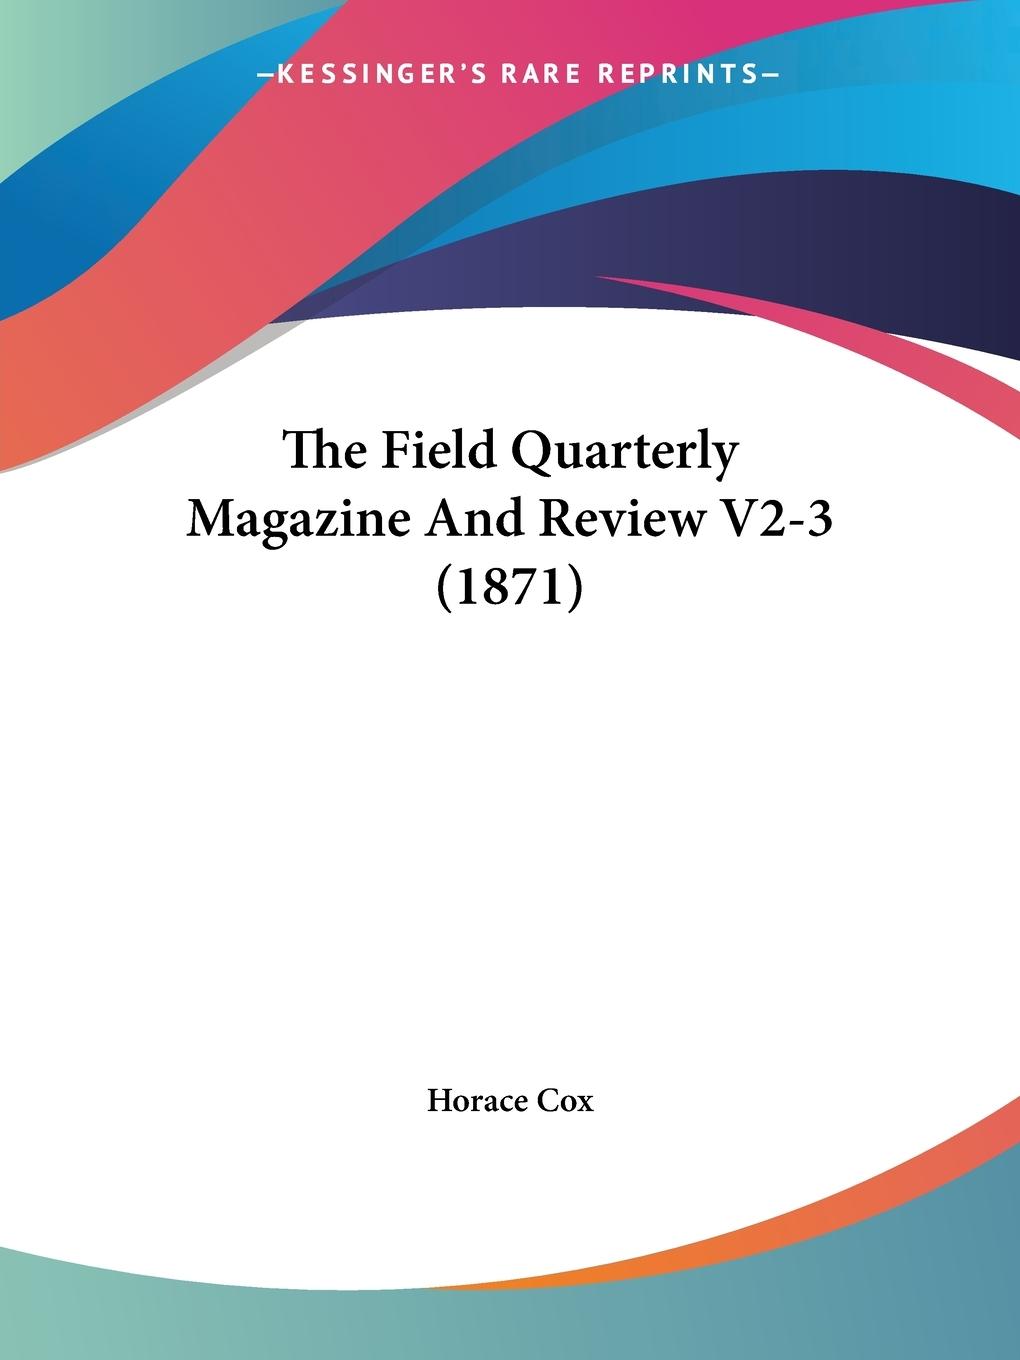 The Field Quarterly Magazine And Review V2-3 (1871) - Horace Cox